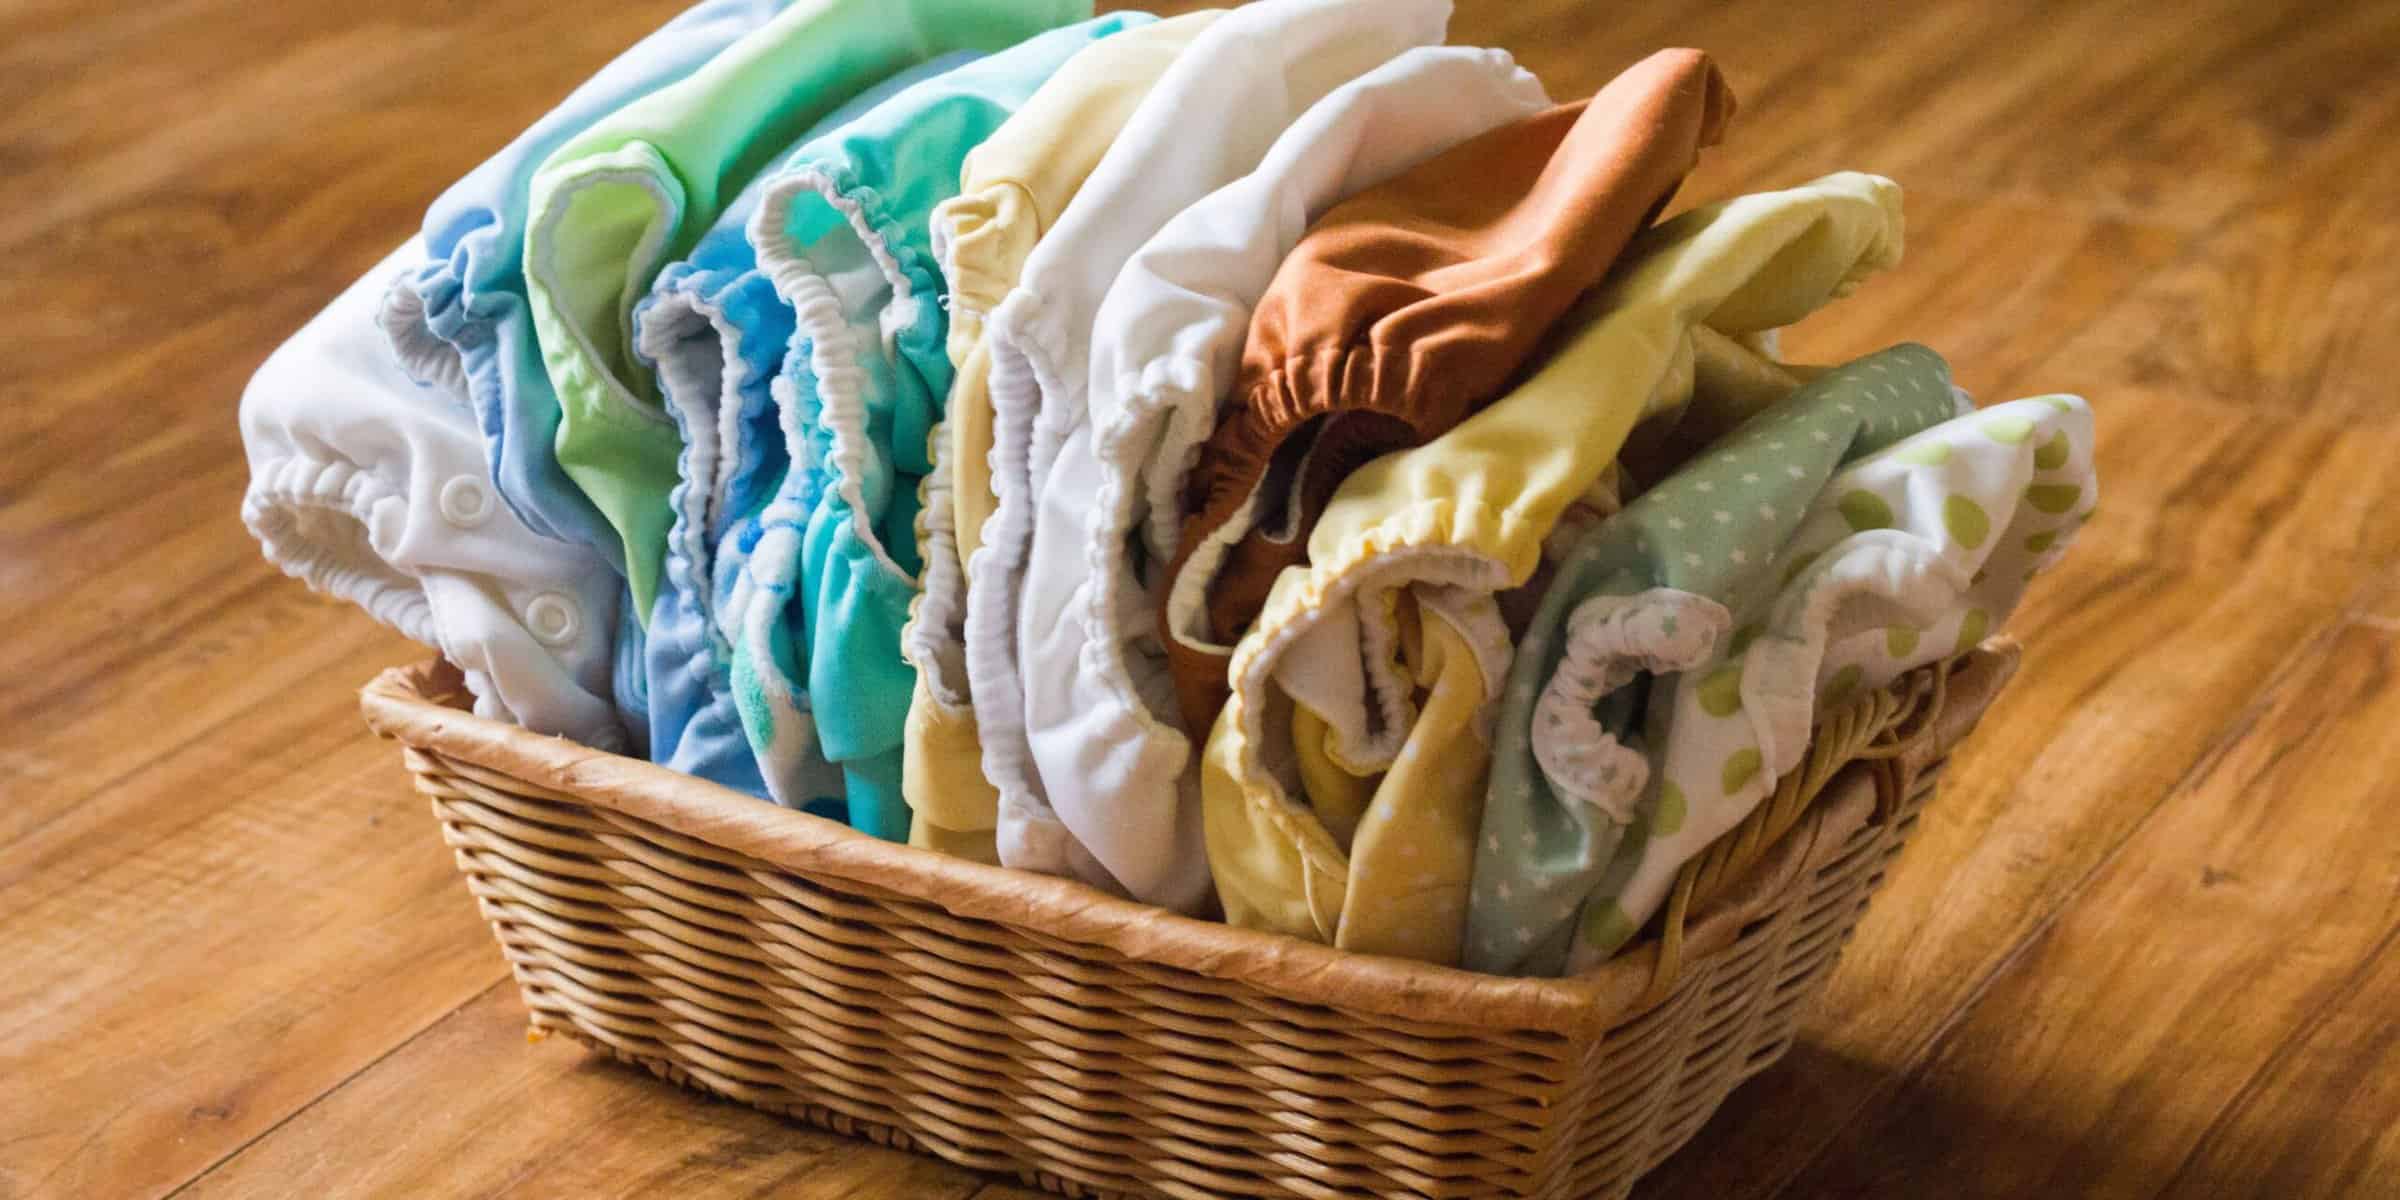 Washing Cloth Diapers With Hard Water